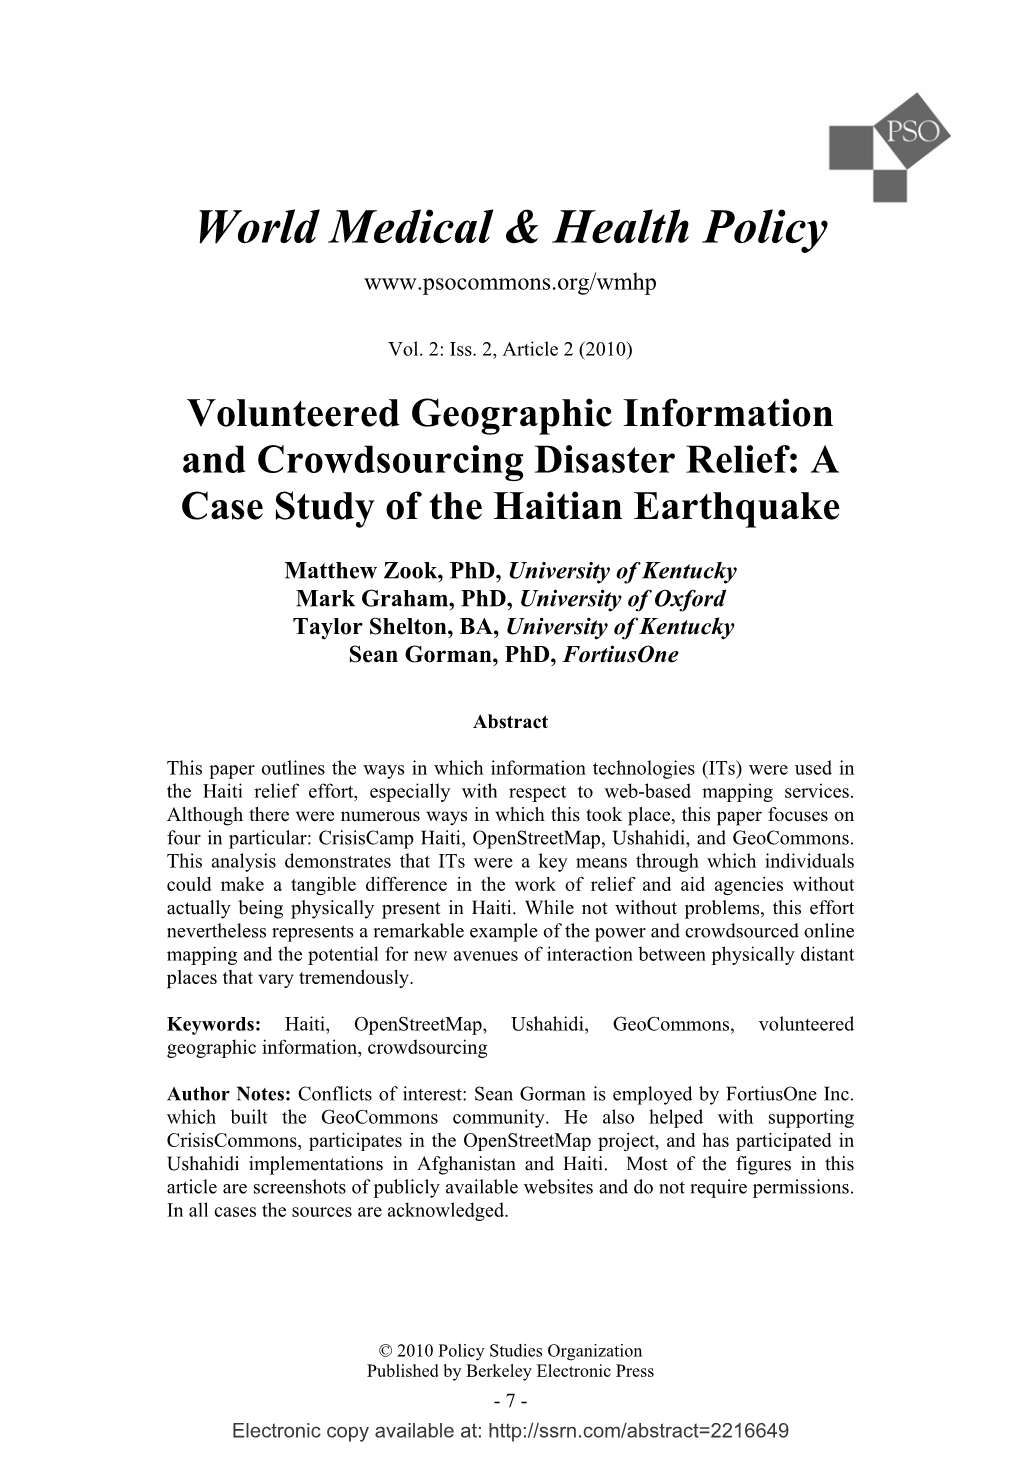 Volunteered Geographic Information and Crowdsourcing Disaster Relief: a Case Study of the Haitian Earthquake